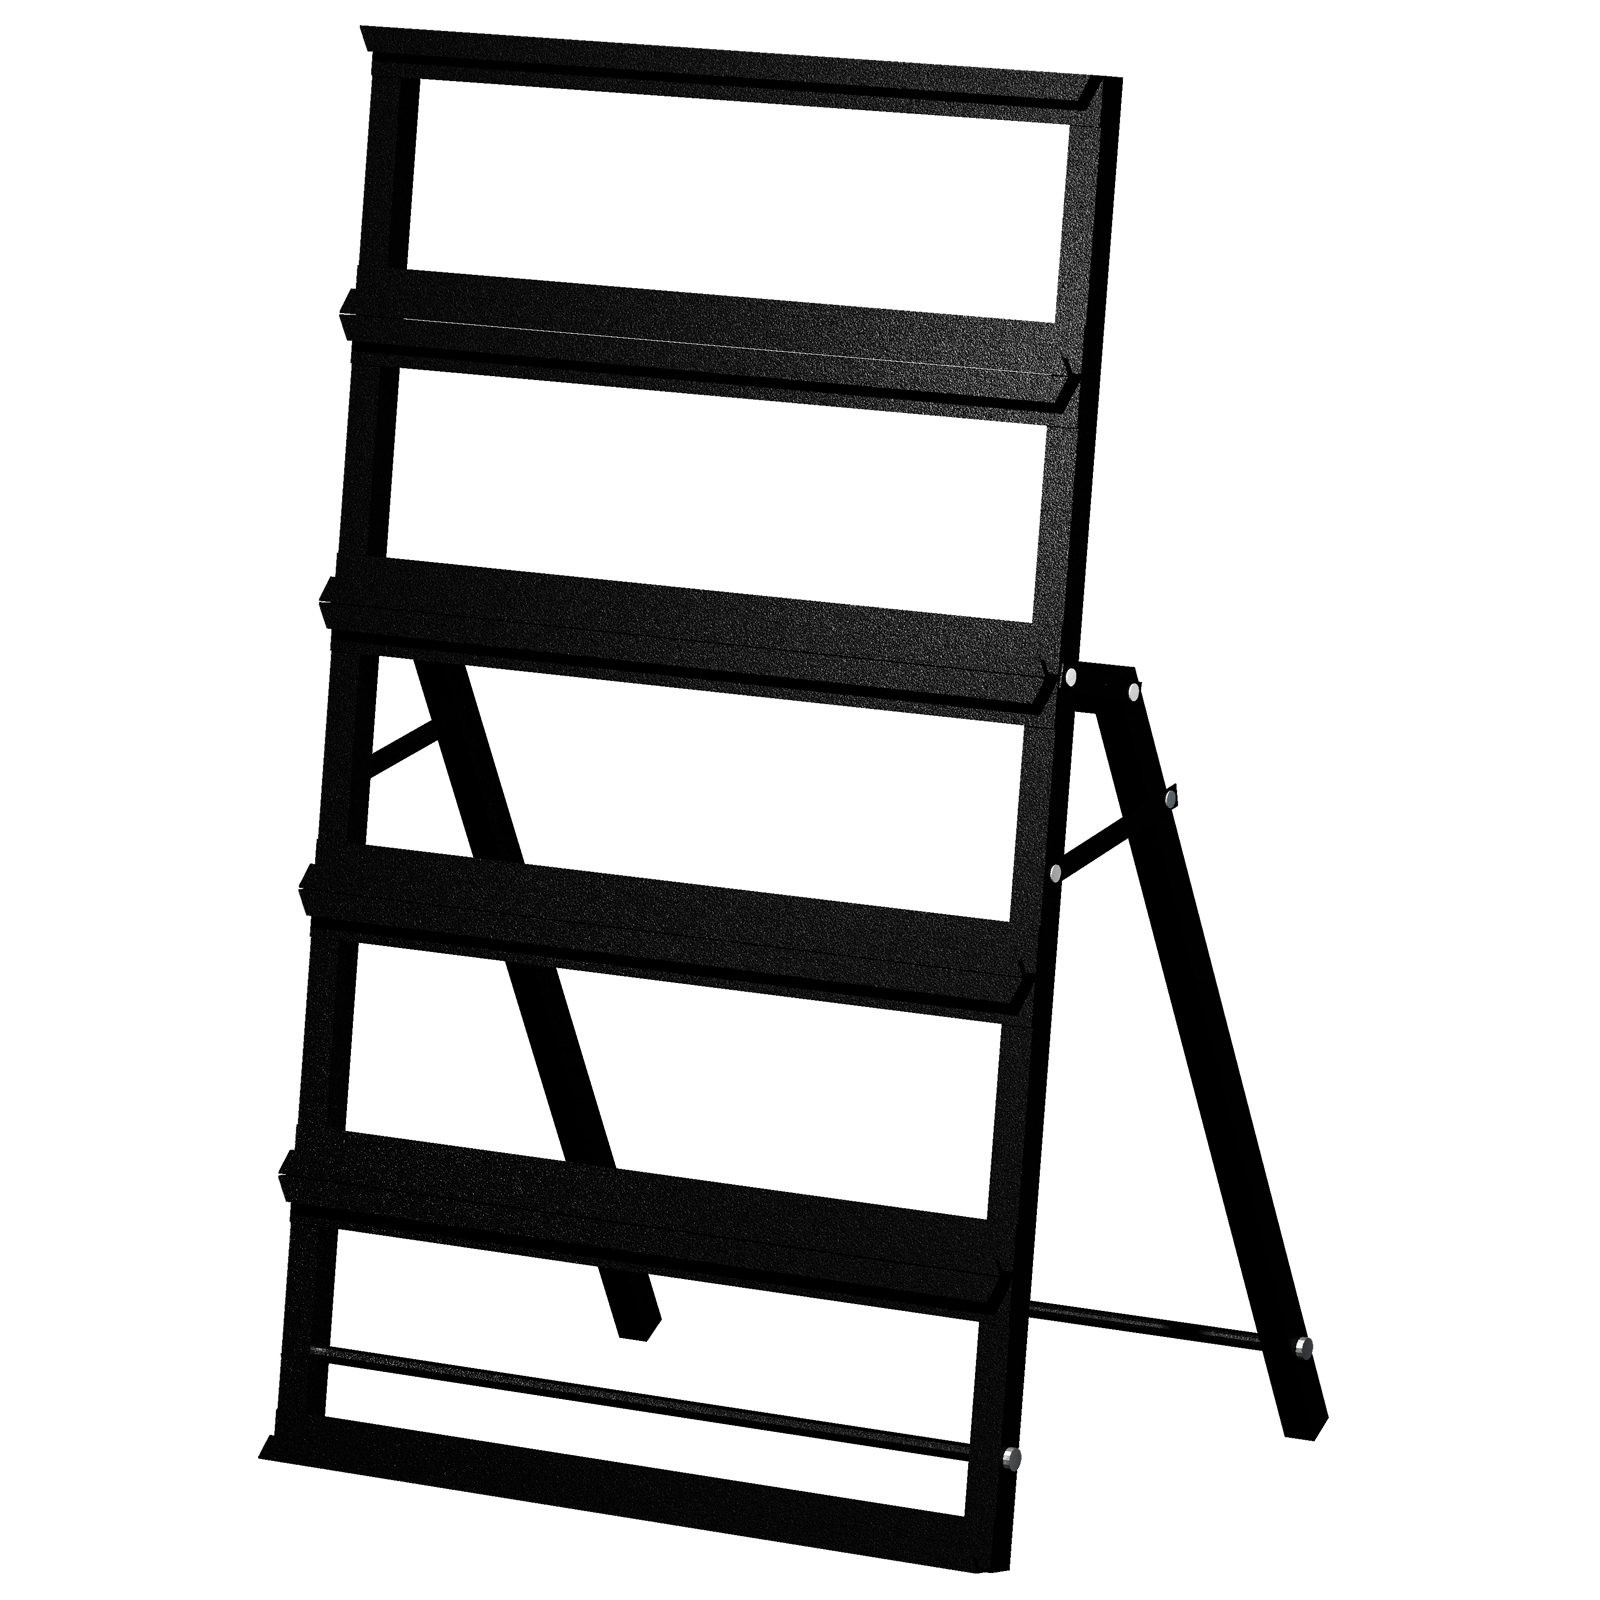 Quantity Discount Portable Easel A-Frame Tower Tradeshow Showroom Display